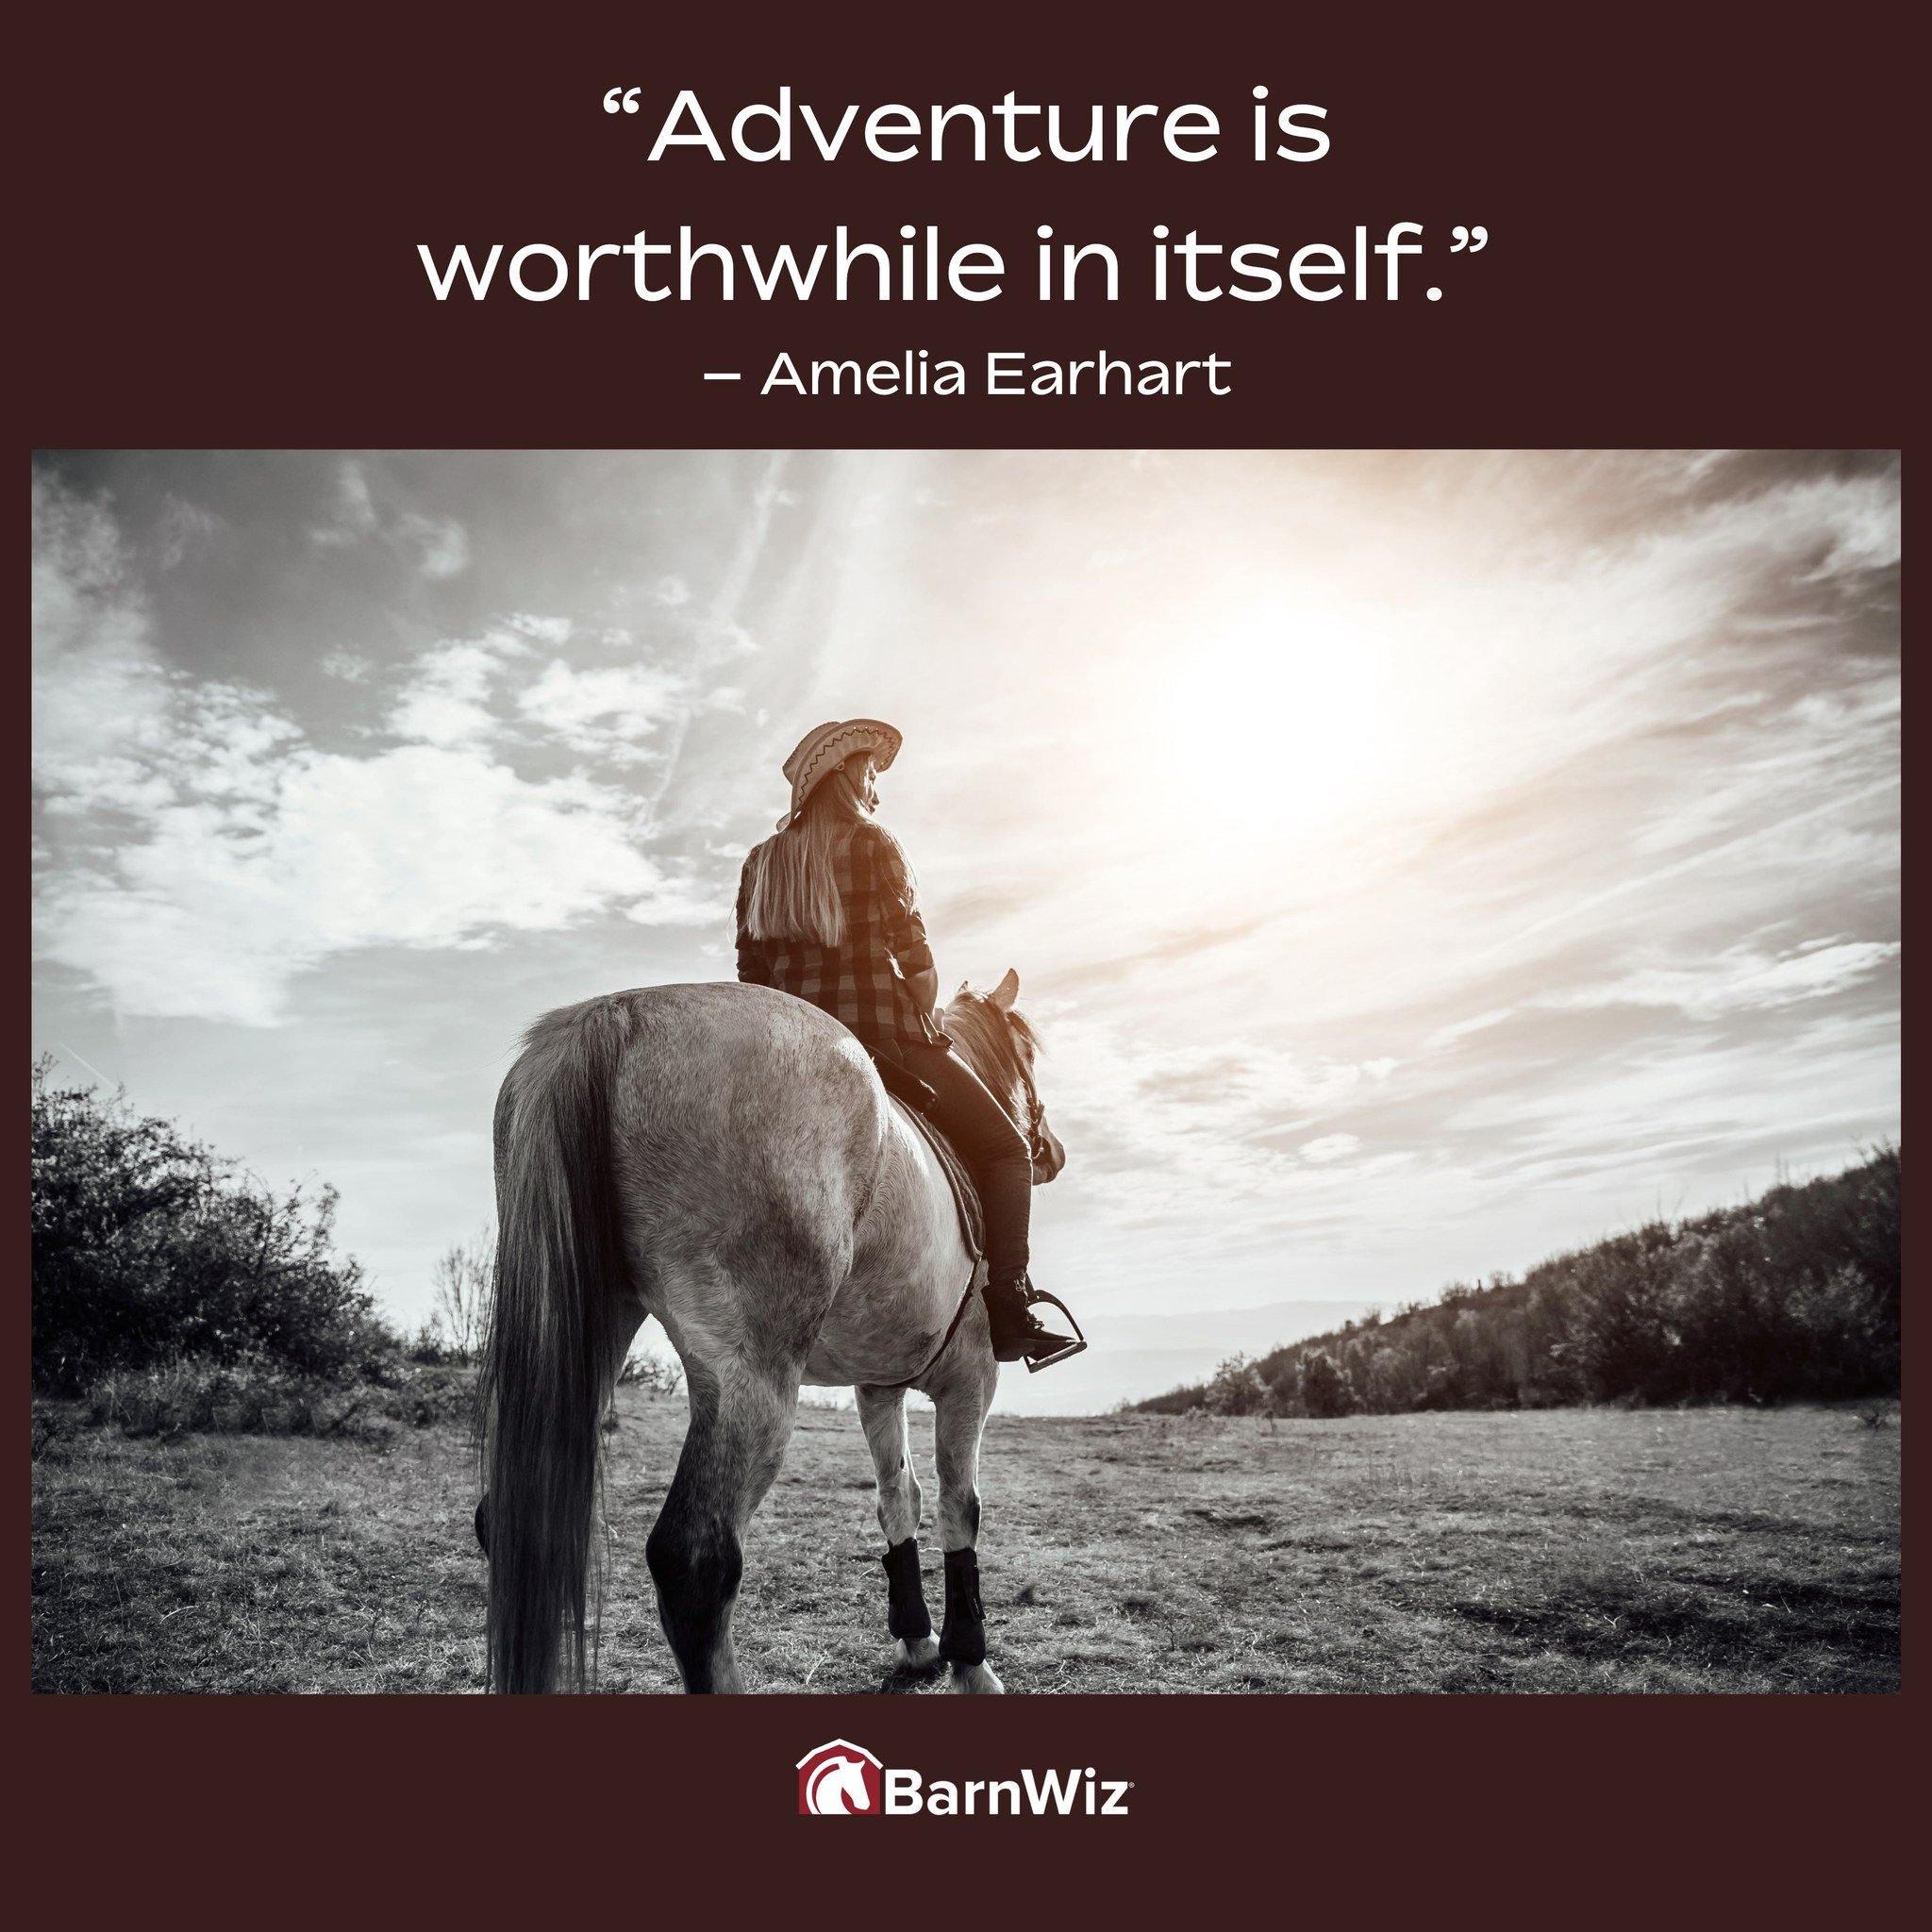 It's finally Friday! What are your plans for the upcoming weekend?

#barnwiz #adventure #horses #equestrian #horselife